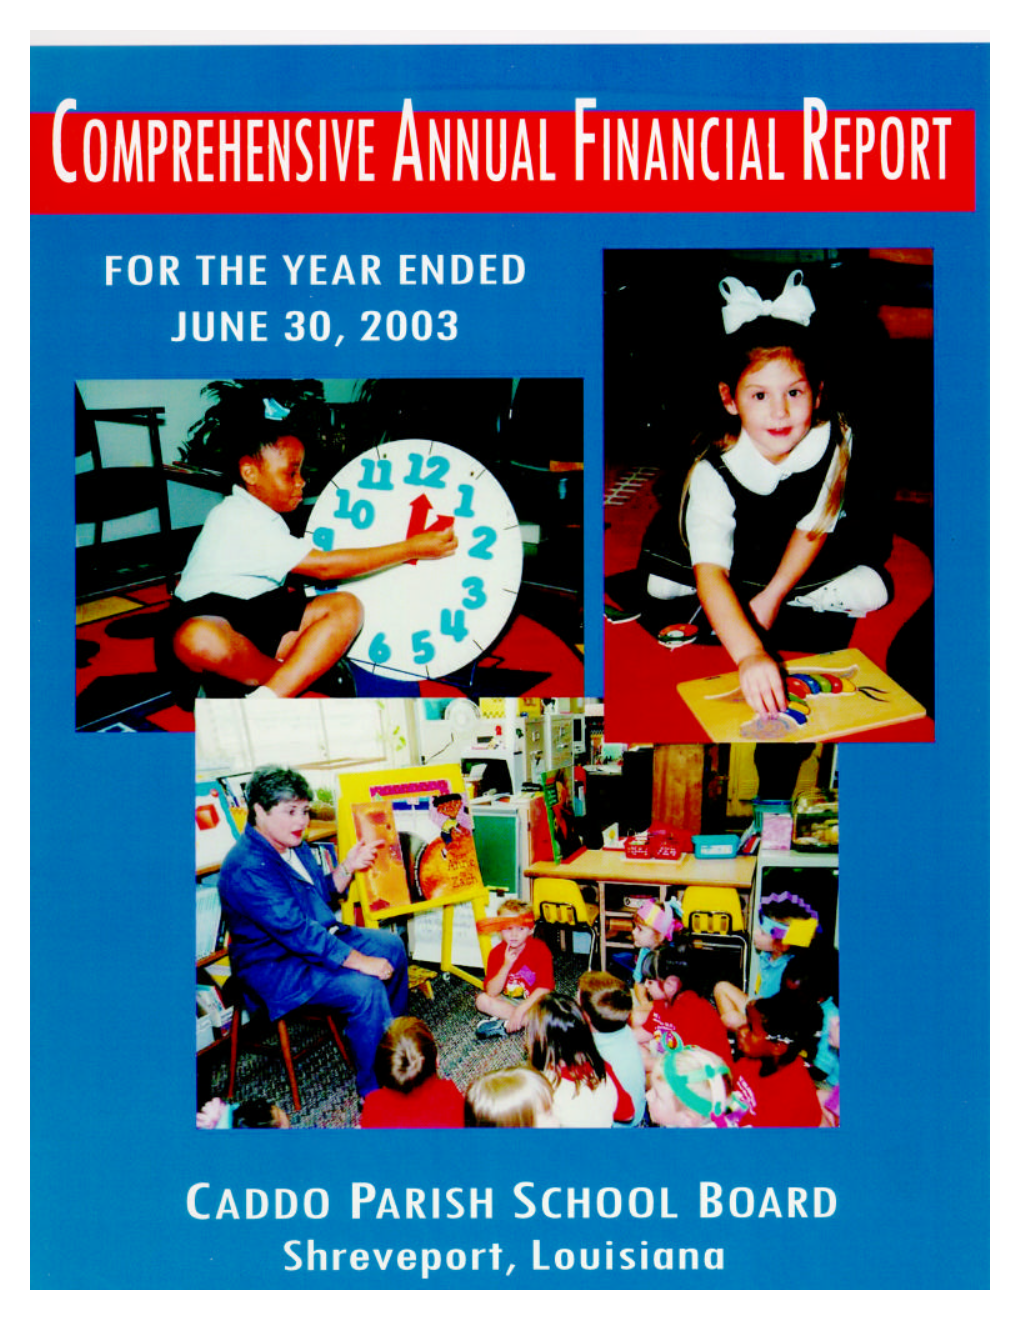 COMPREHENSIVE ANNUAL FINANCIAL REPORT of the CADDO PARISH SCHOOL BOARD Shreveport, Louisiana for the Year Ended June 30, 2003